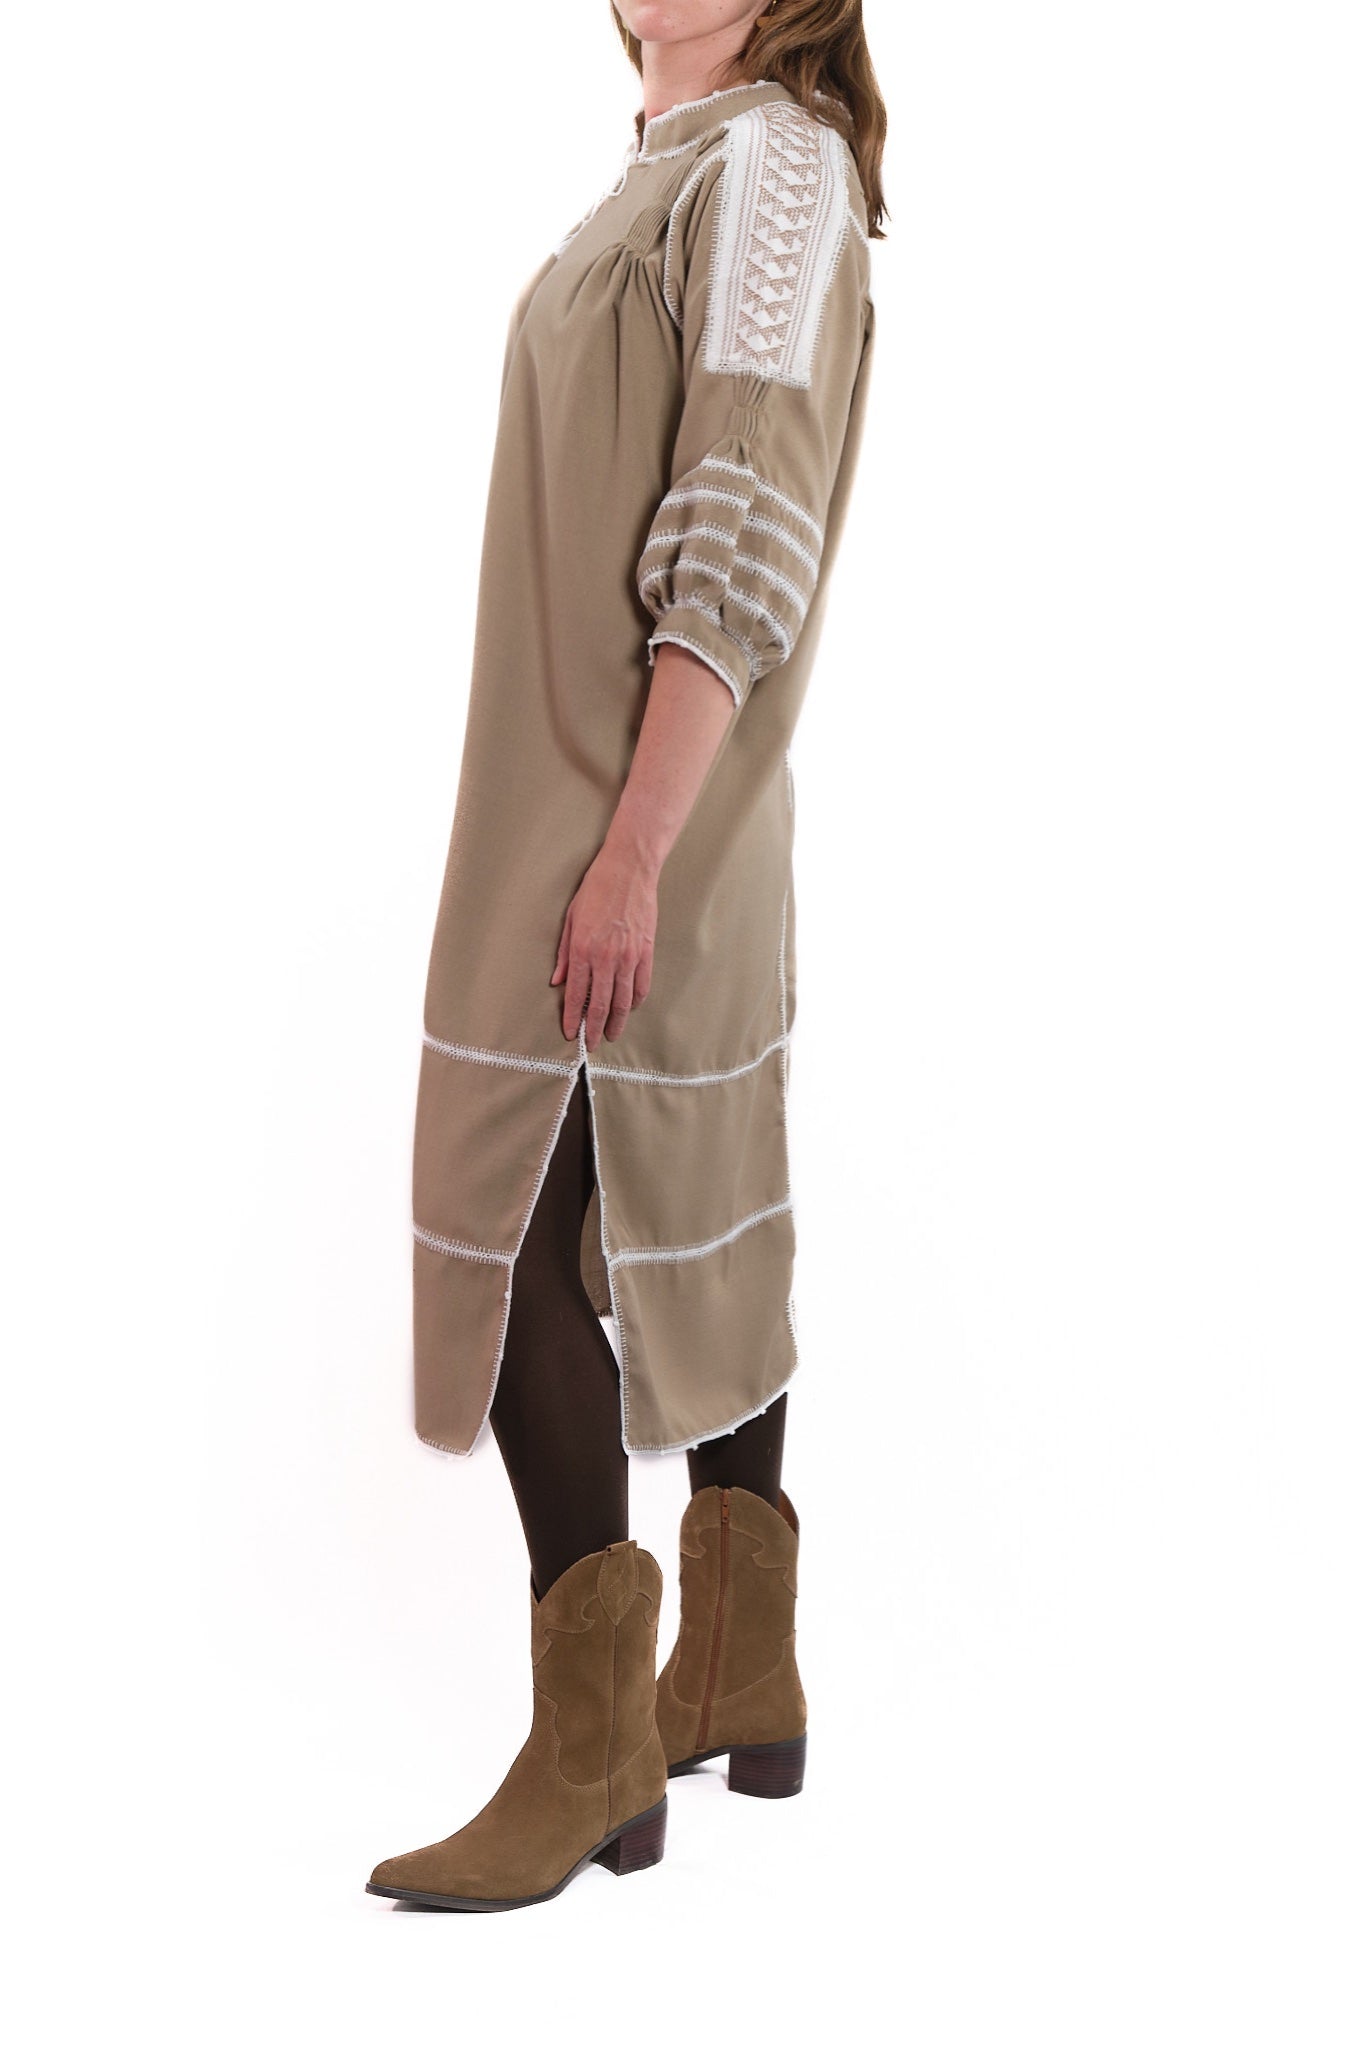 Odilia Dress light brown with white and brown embroidery